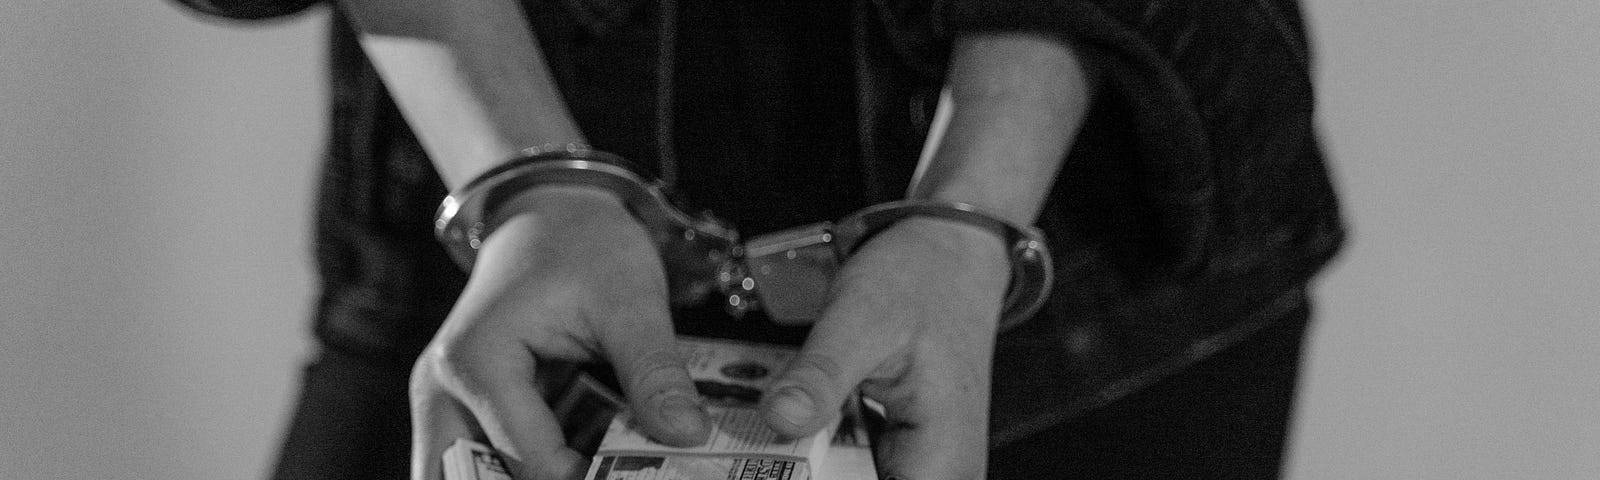 Woman in police cuffs holding blocks of cash